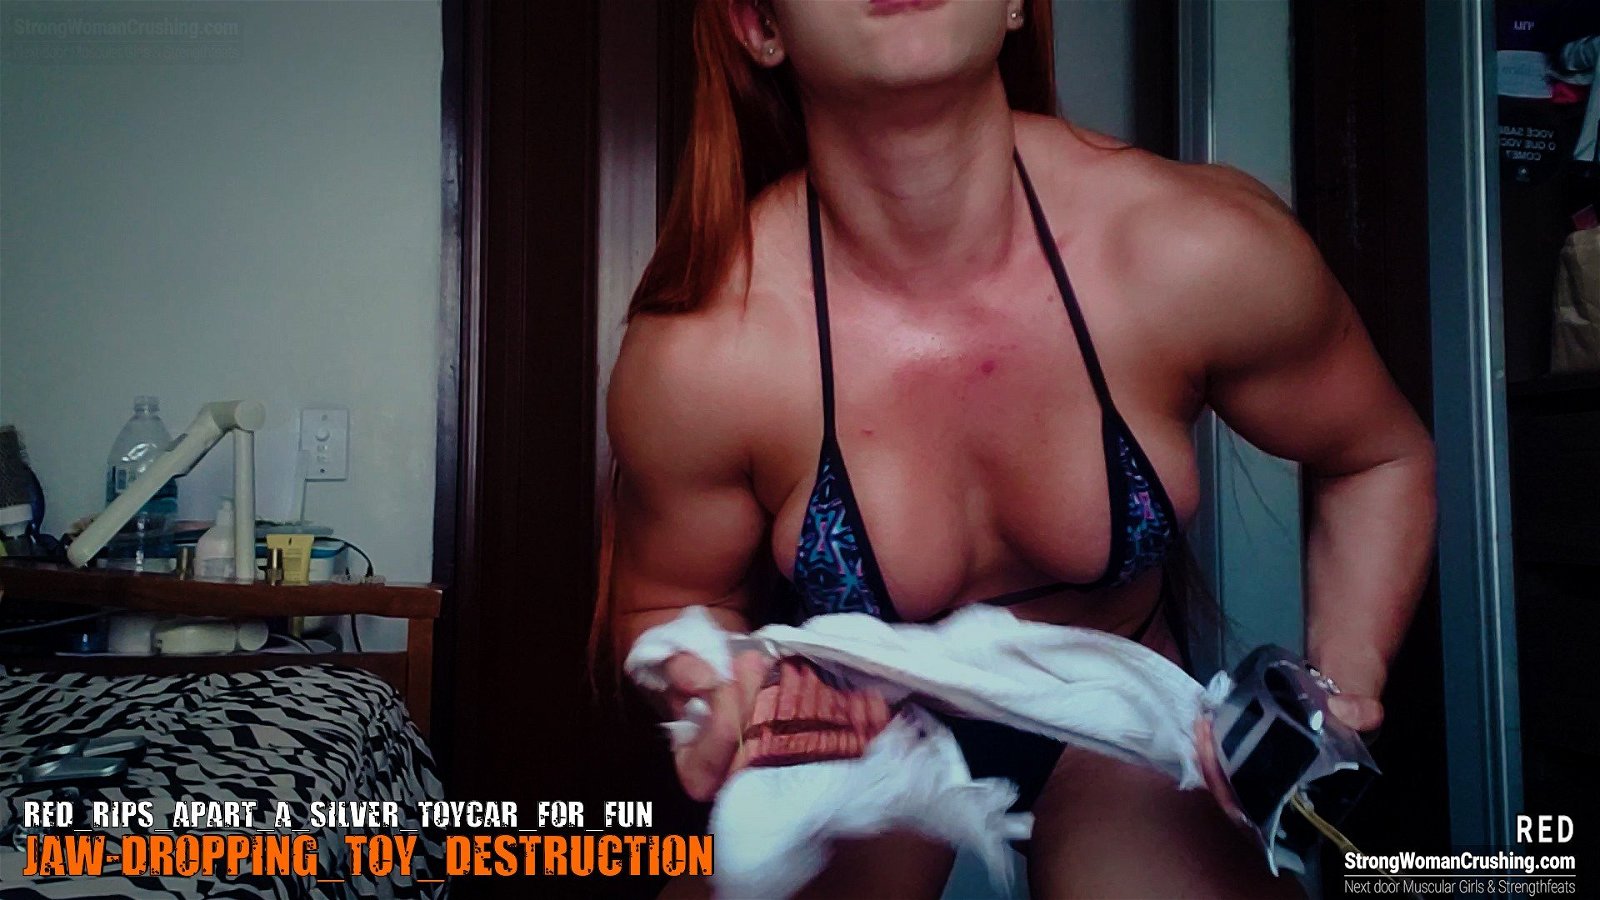 Photo by MusclegirlStrength with the username @MusclegirlStrength, who is a brand user,  October 12, 2023 at 4:33 AM and the text says '🔥 Watch RED unleash her power! 
💪💥 See her crush a silver toycar for pure excitement! Join the strength revolution at www.strongwomancrushing.com and witness more jaw-dropping feats of muscle domination! 
🚗💥 #MuscularWomen #FeatsOfStrength..'